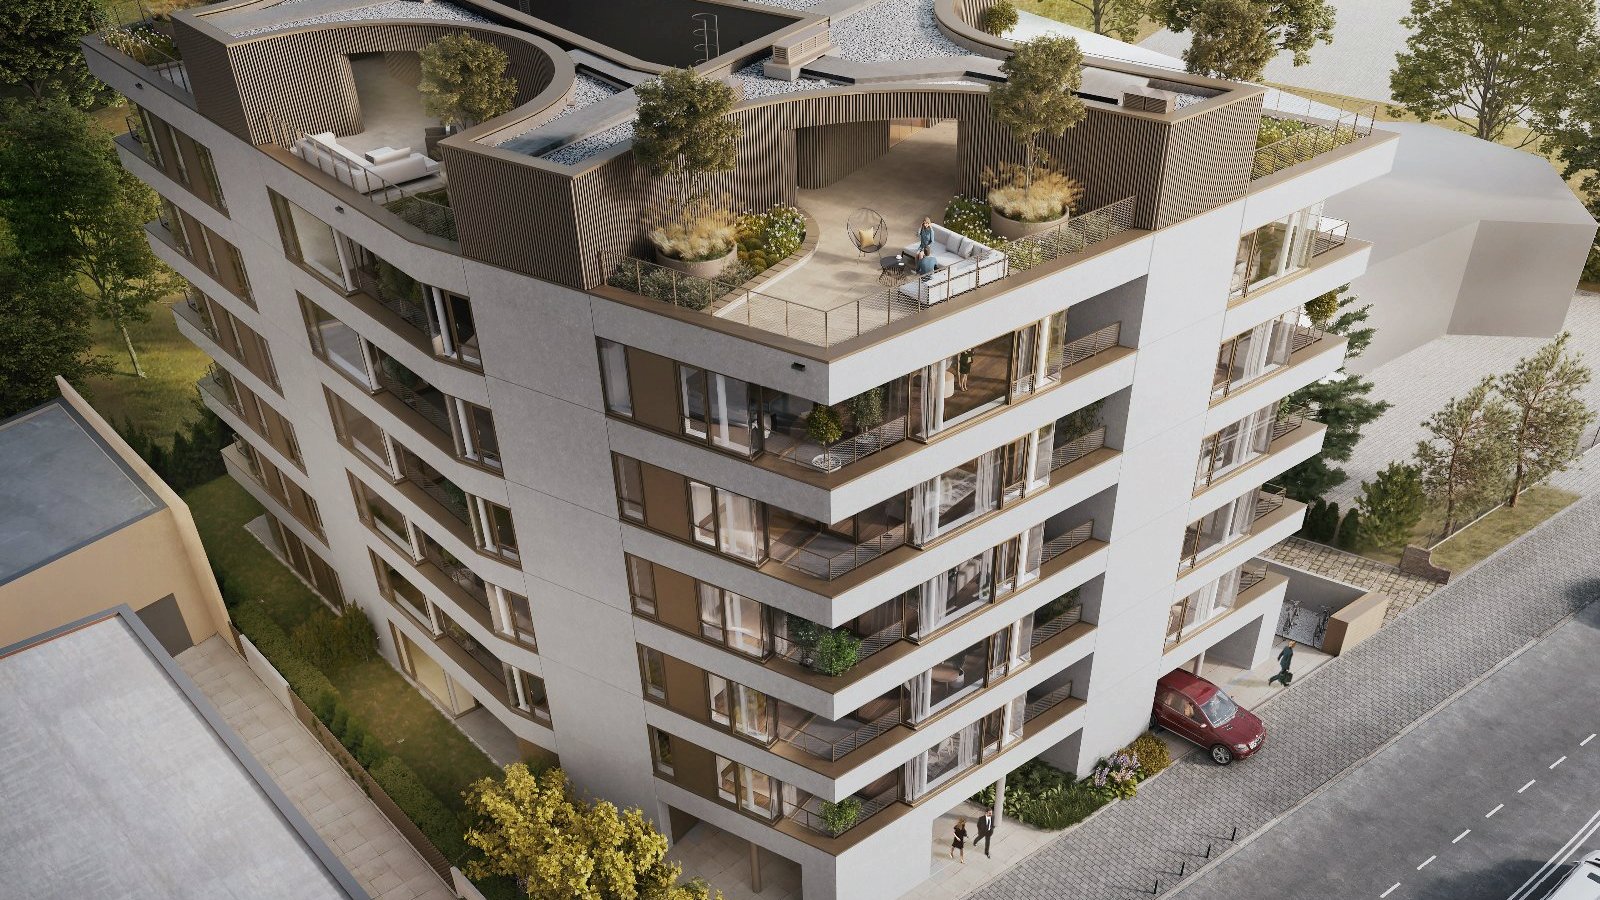 The picture shows the Pułaskiego 19 investment from above. You can see the roof of the investment, which serves as a balcony. There are trees all around, the street is visible at the bottom of the visualisation.